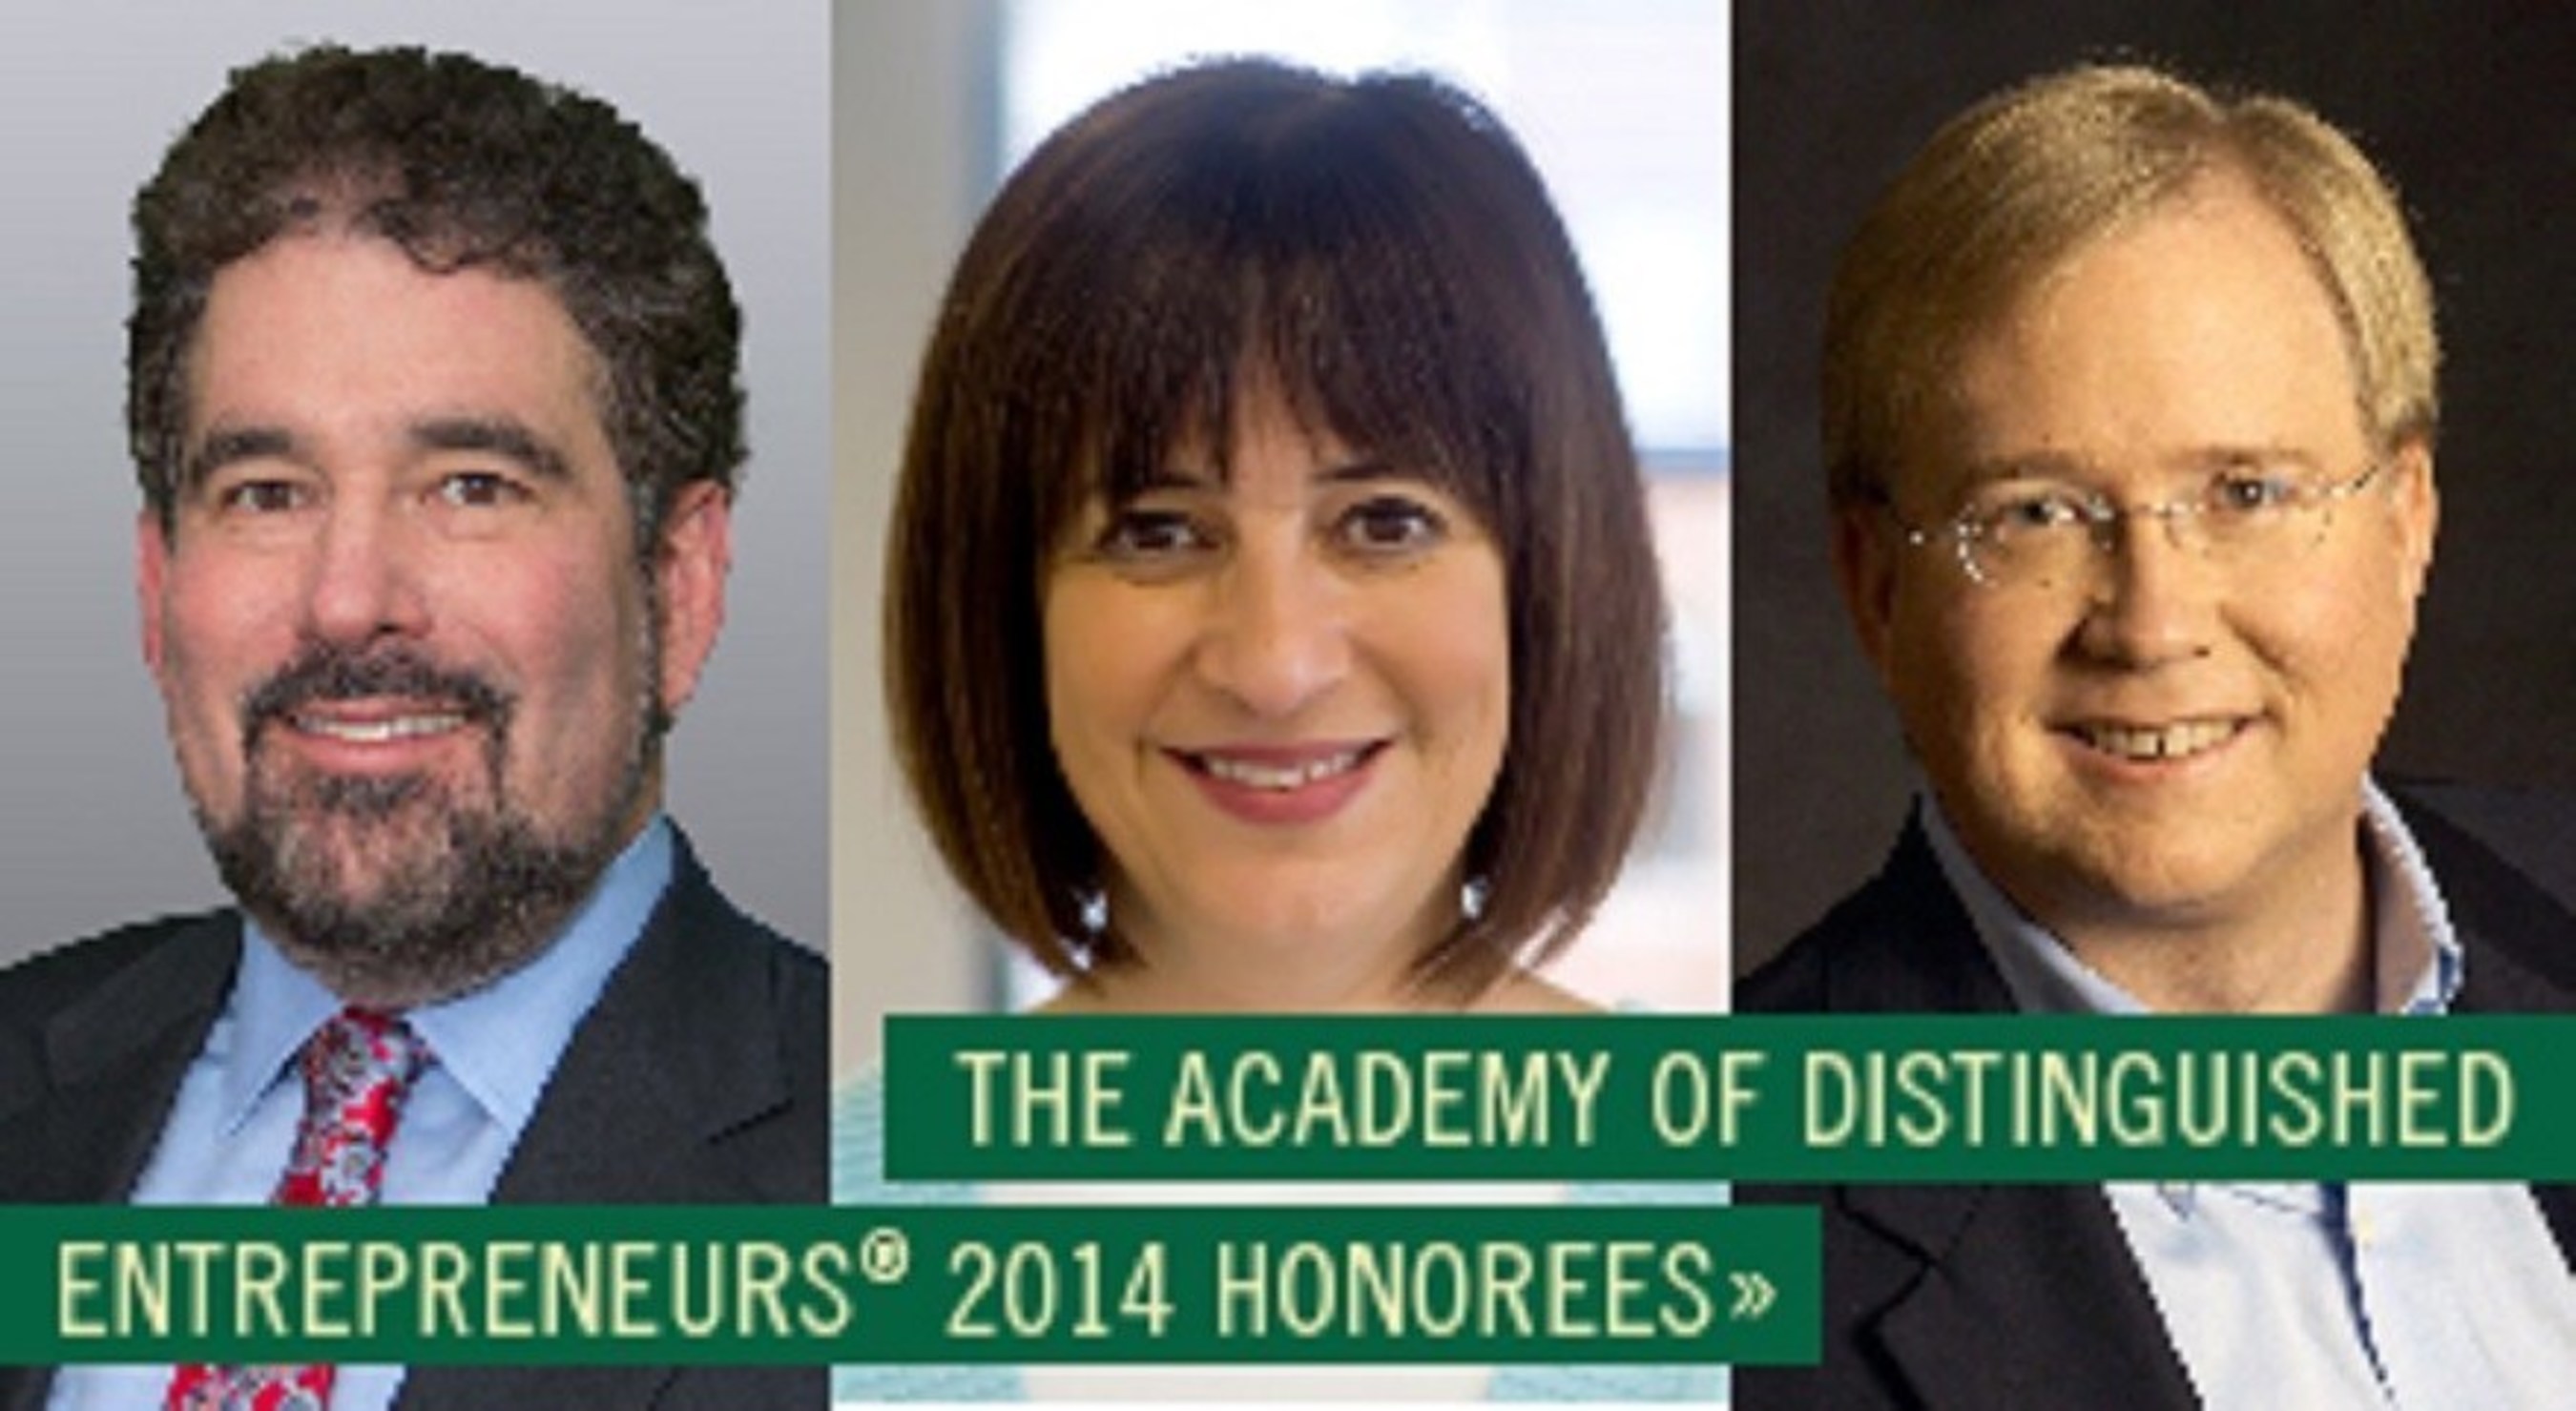 Babson College inducts Alan Trefler, Diane Hessan, and Graham Weston into the Academy of Distinguished Entrepreneurs at Babson College.